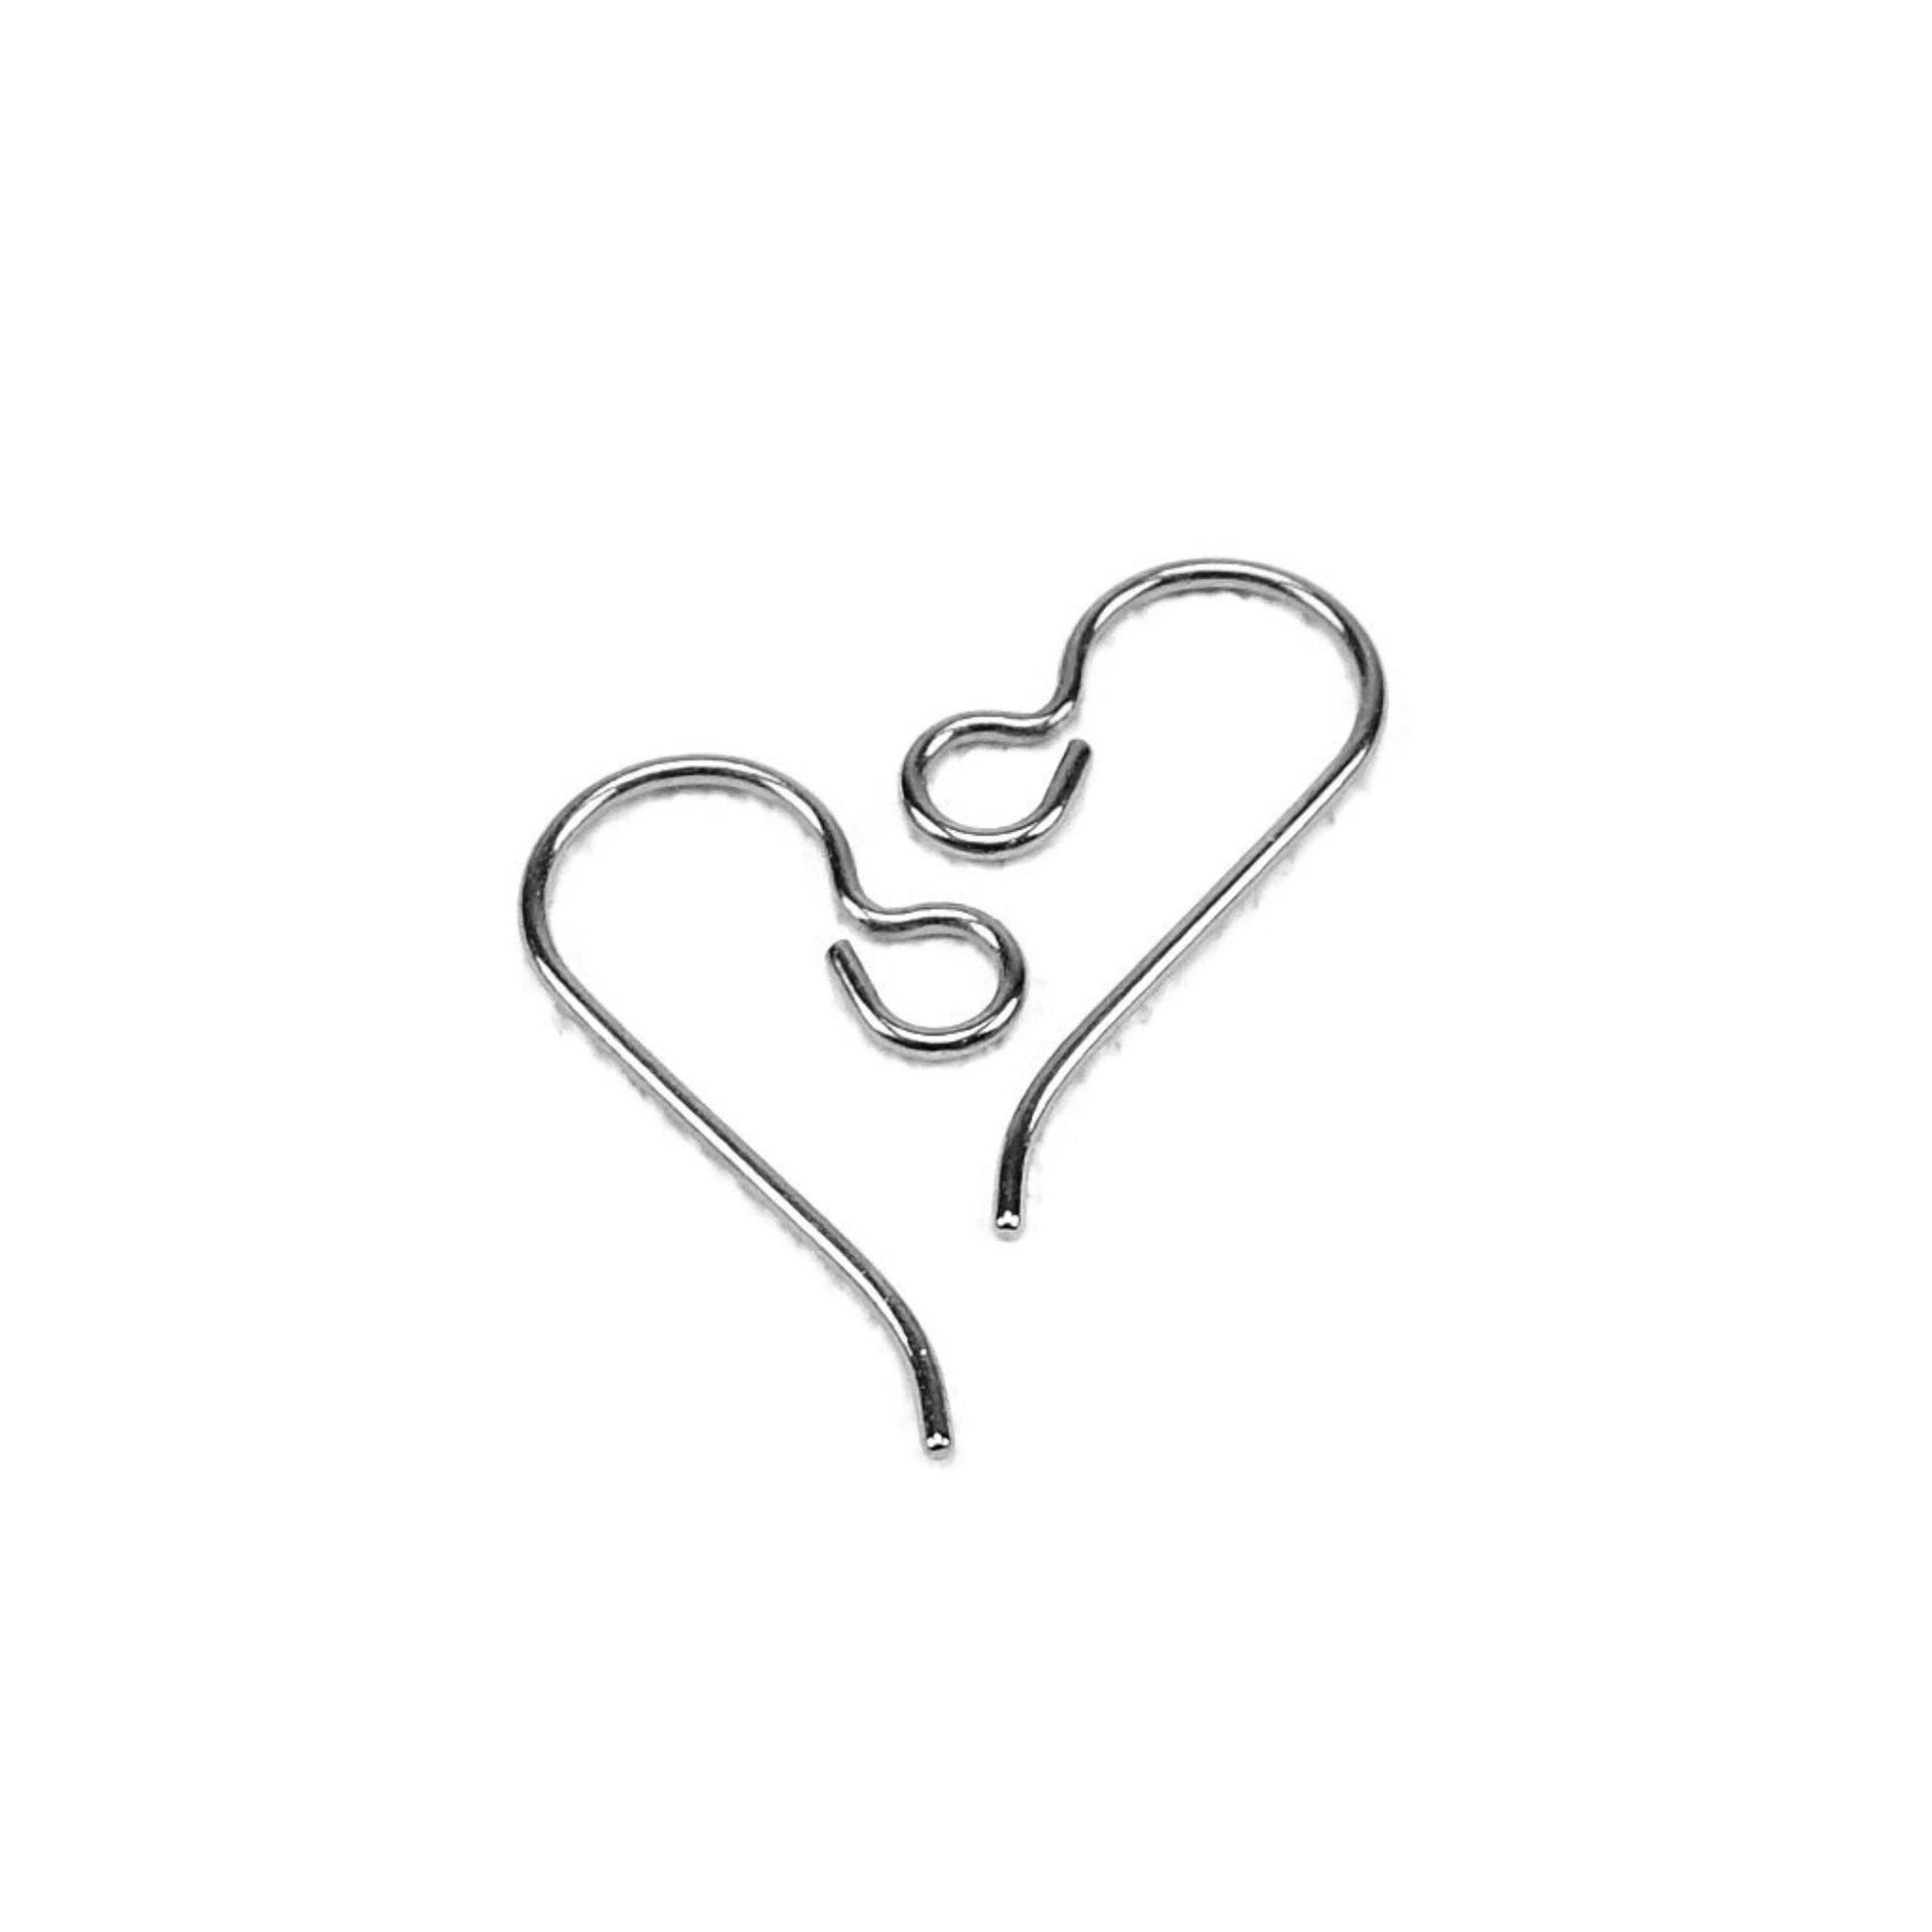  10 Silver Nickel Free Titanium French Hook Earring